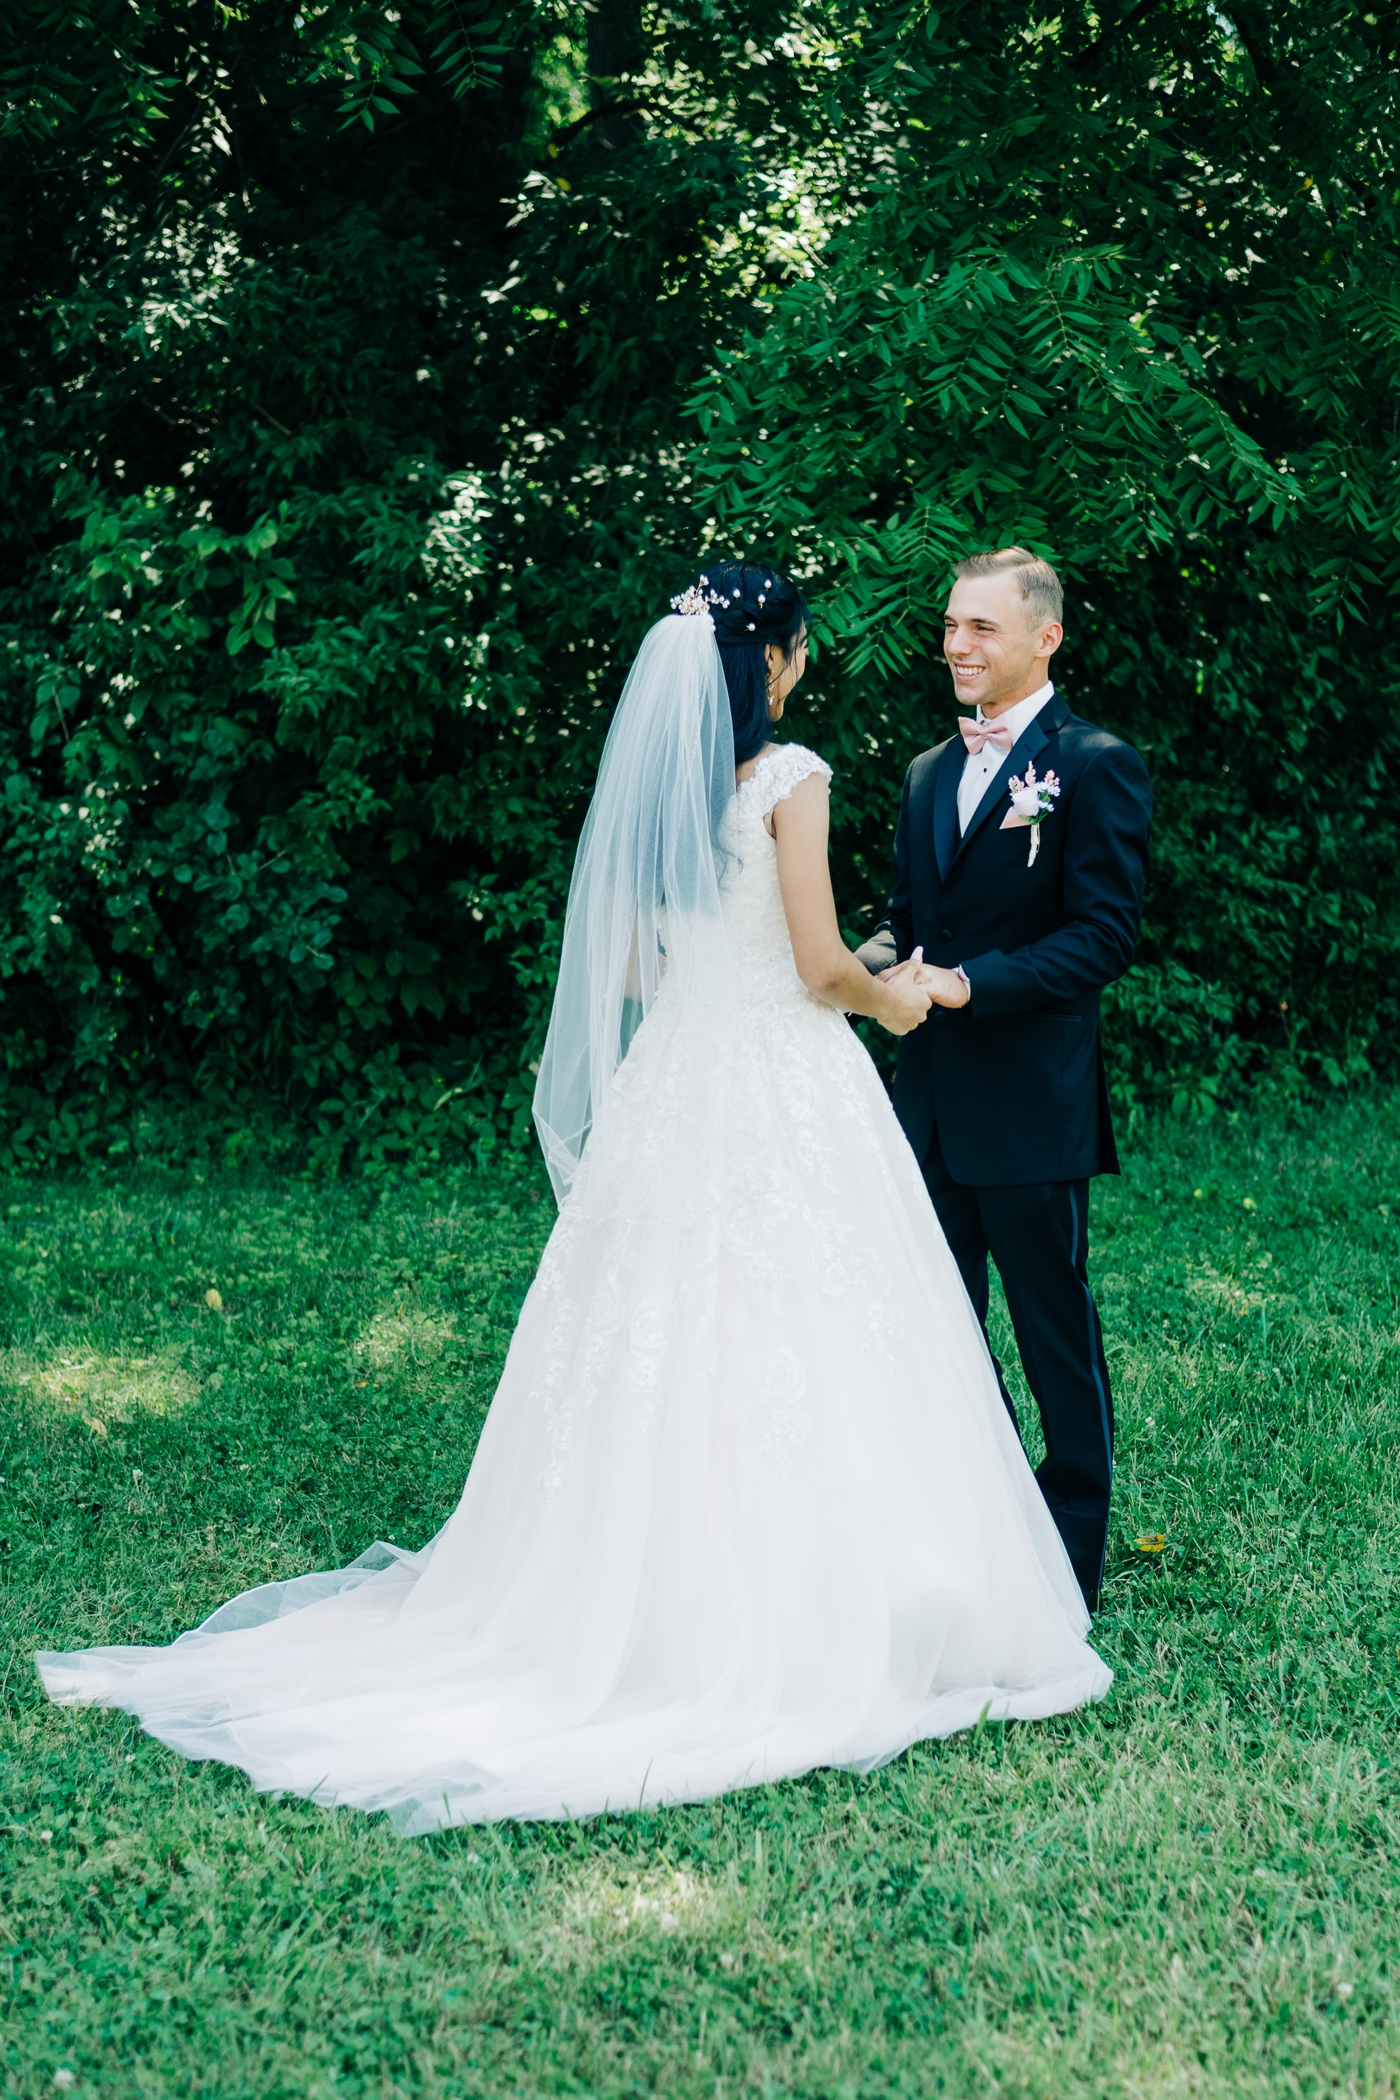 Bride in a lace beaded ballgown from David’s Bridal